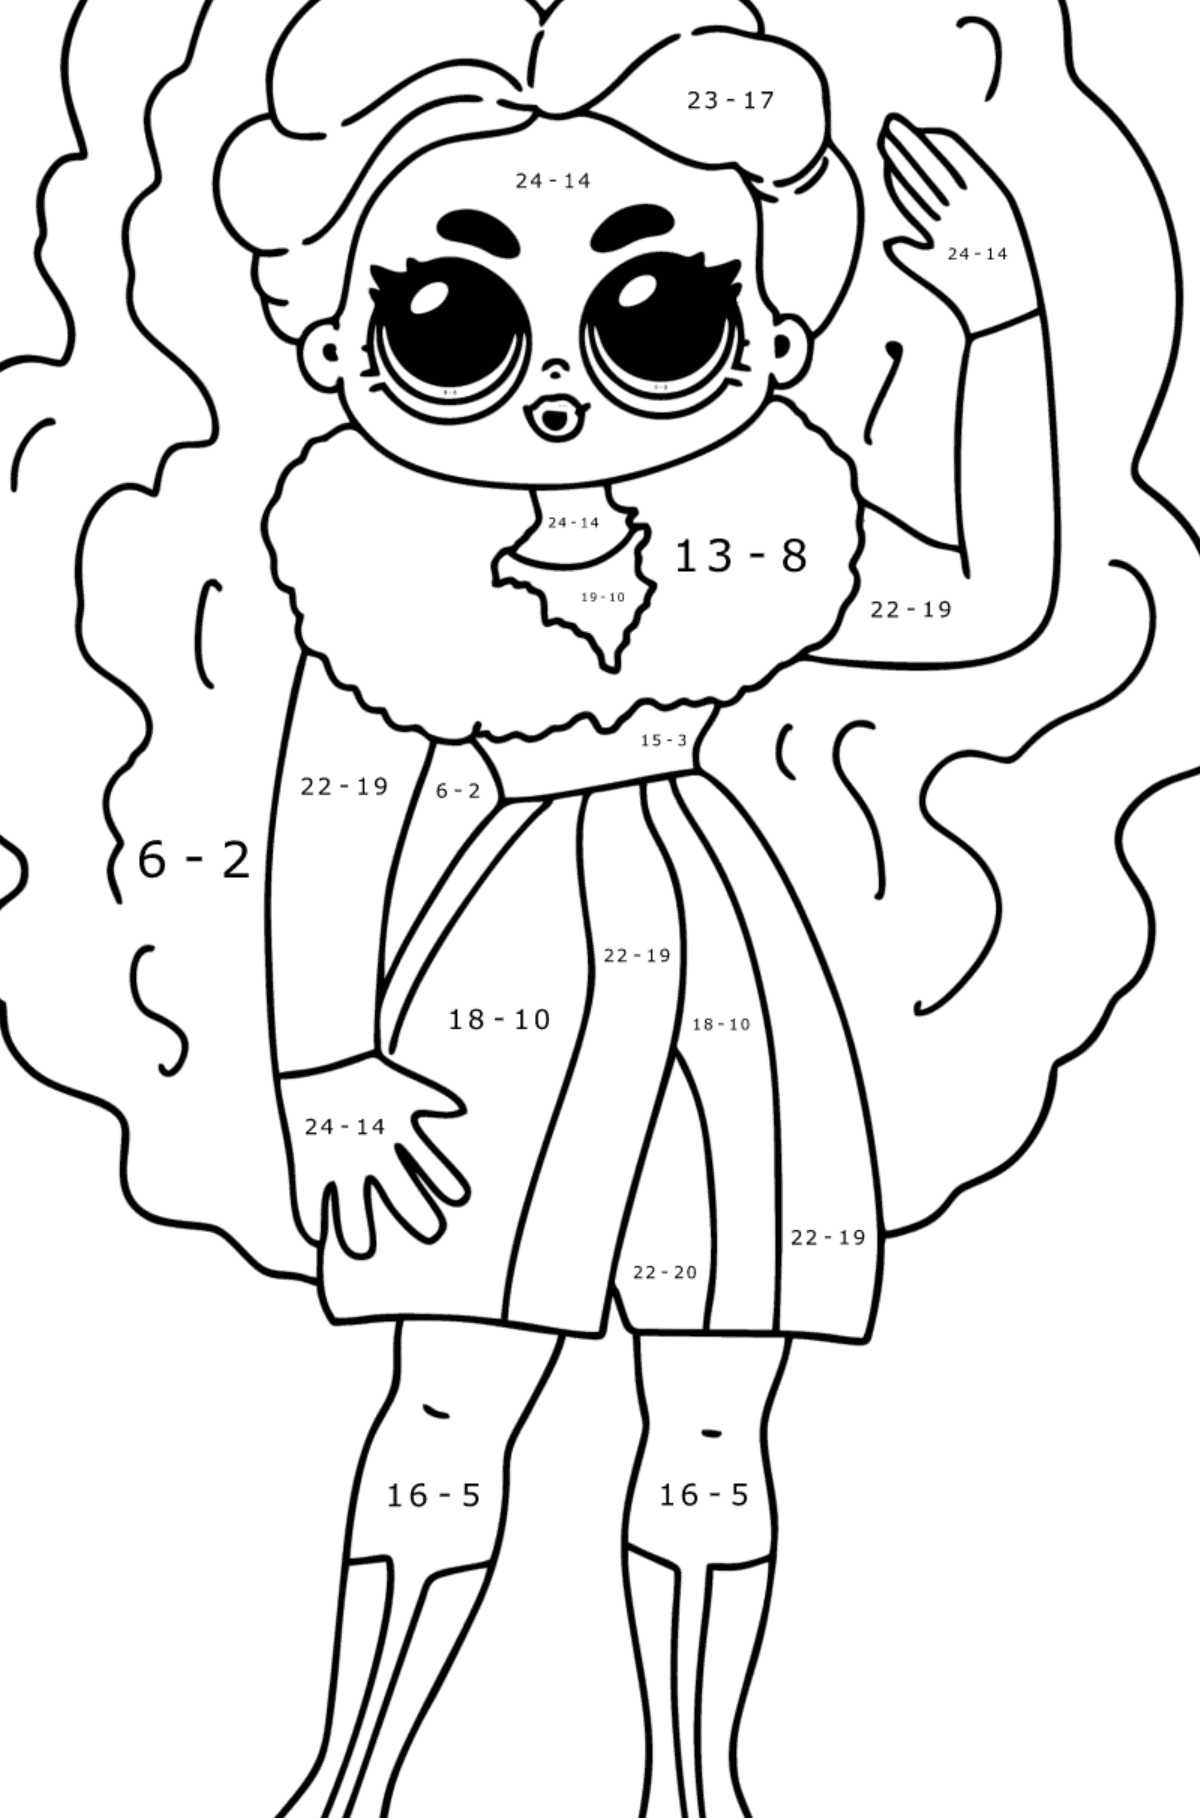 Coloring page LOL OMG Cute Girl - Math Coloring - Subtraction for Kids